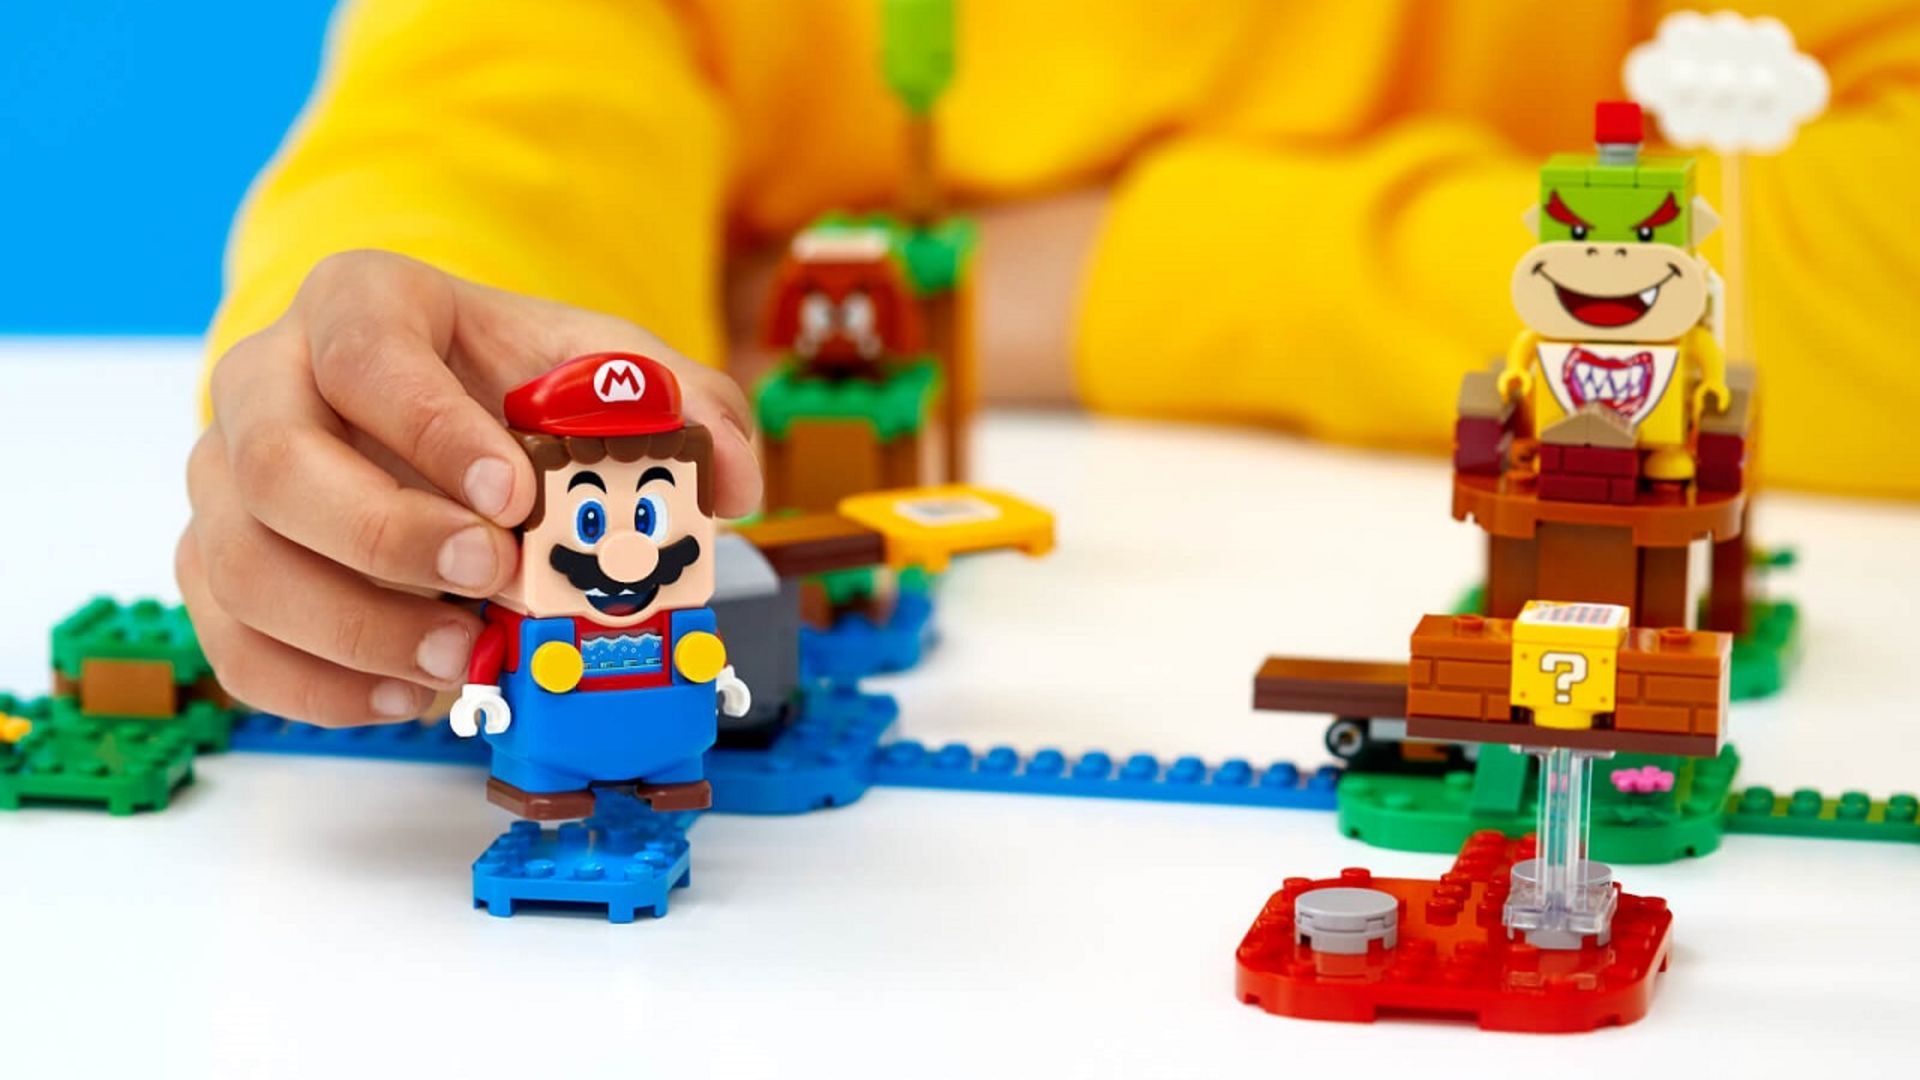 You can already save 10% off the Lego Super Mario sets • Eurogamer.net